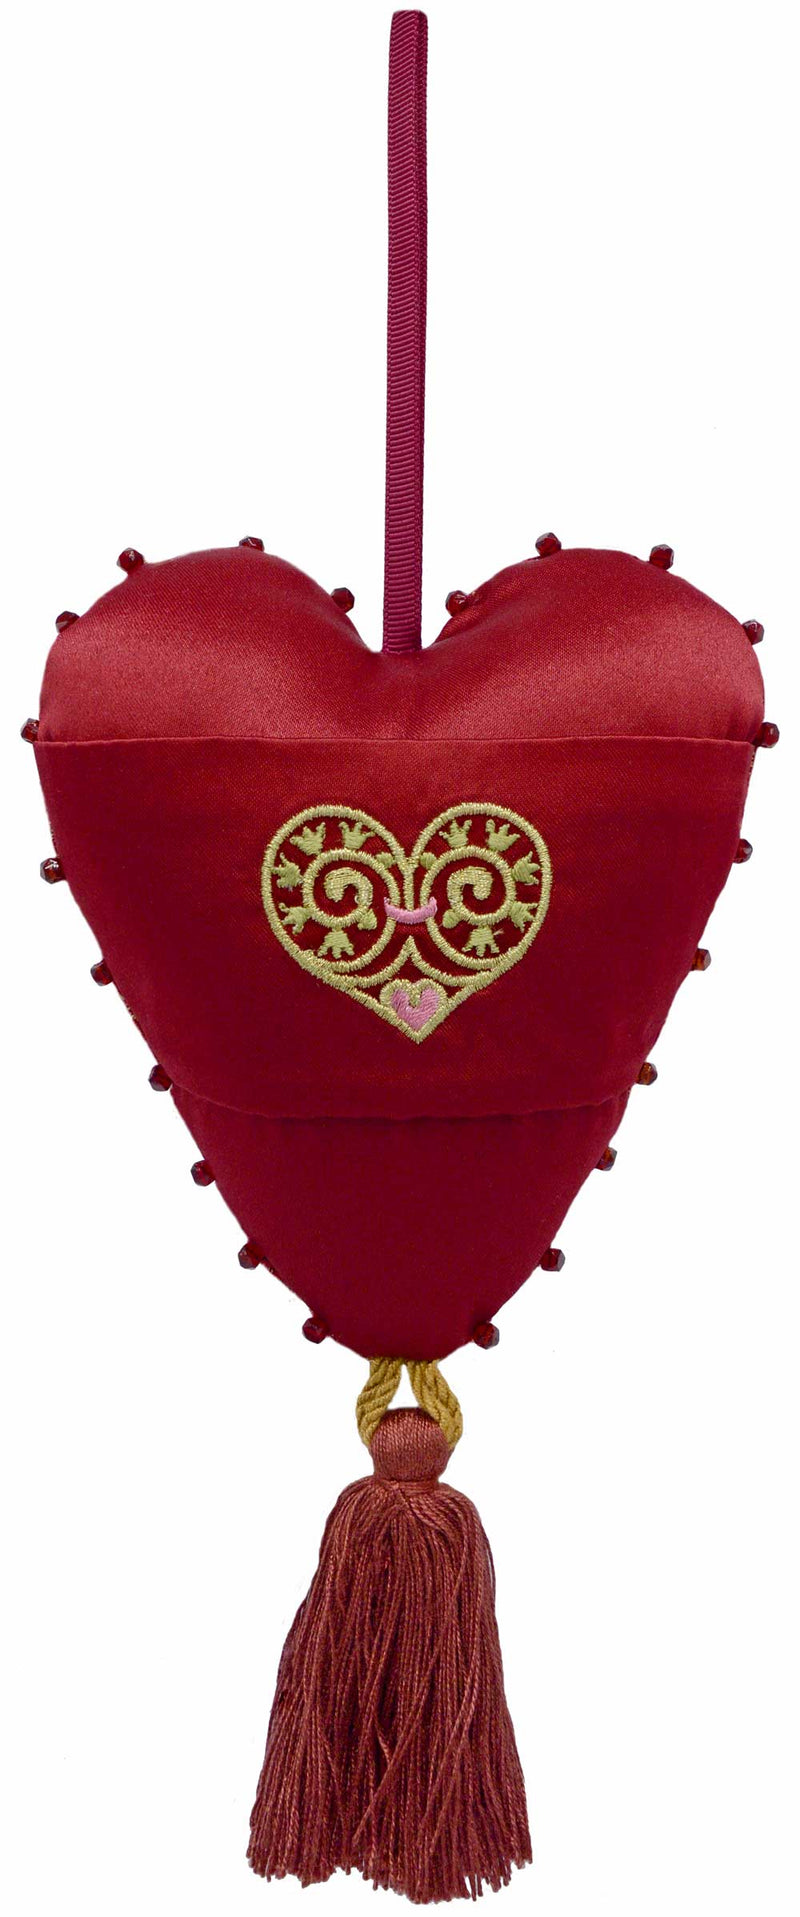 Silk heart charm in antique red brocade with Duchess satin embroidered back